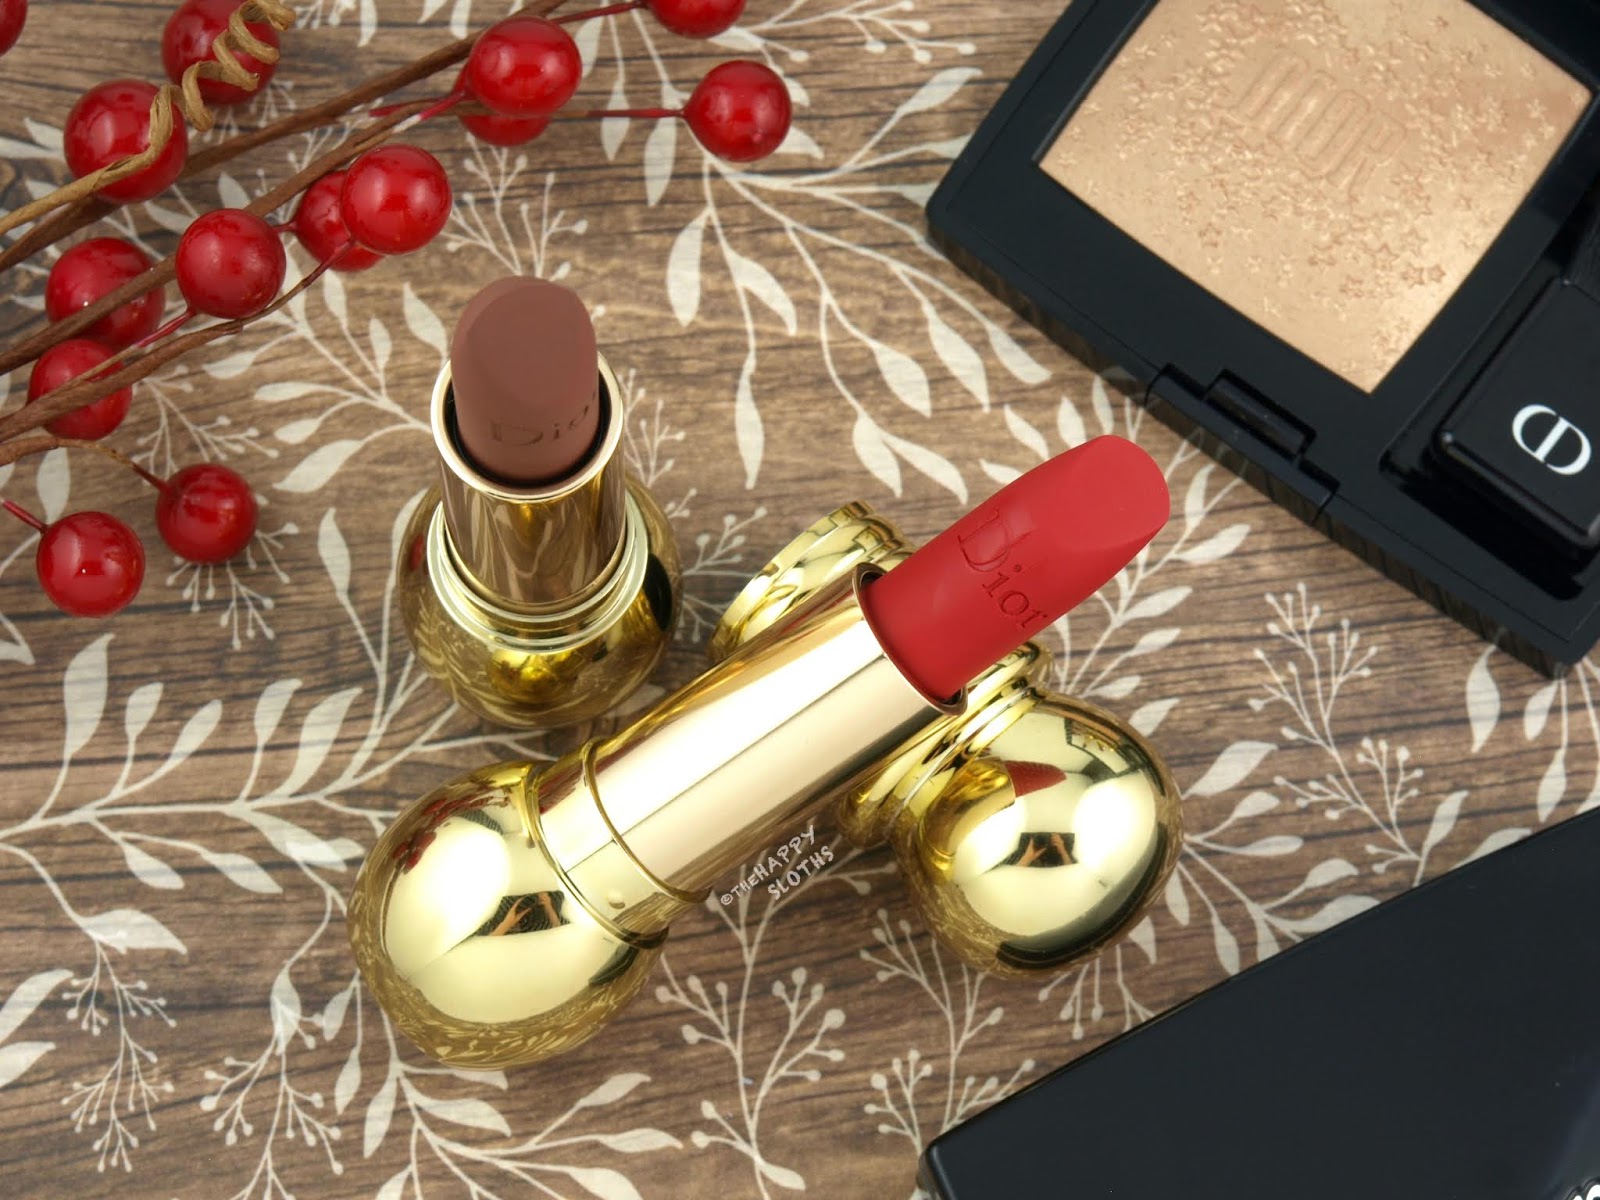 Dior | Holiday 2018 Diorific Mat Lipstick: Review and Swatches